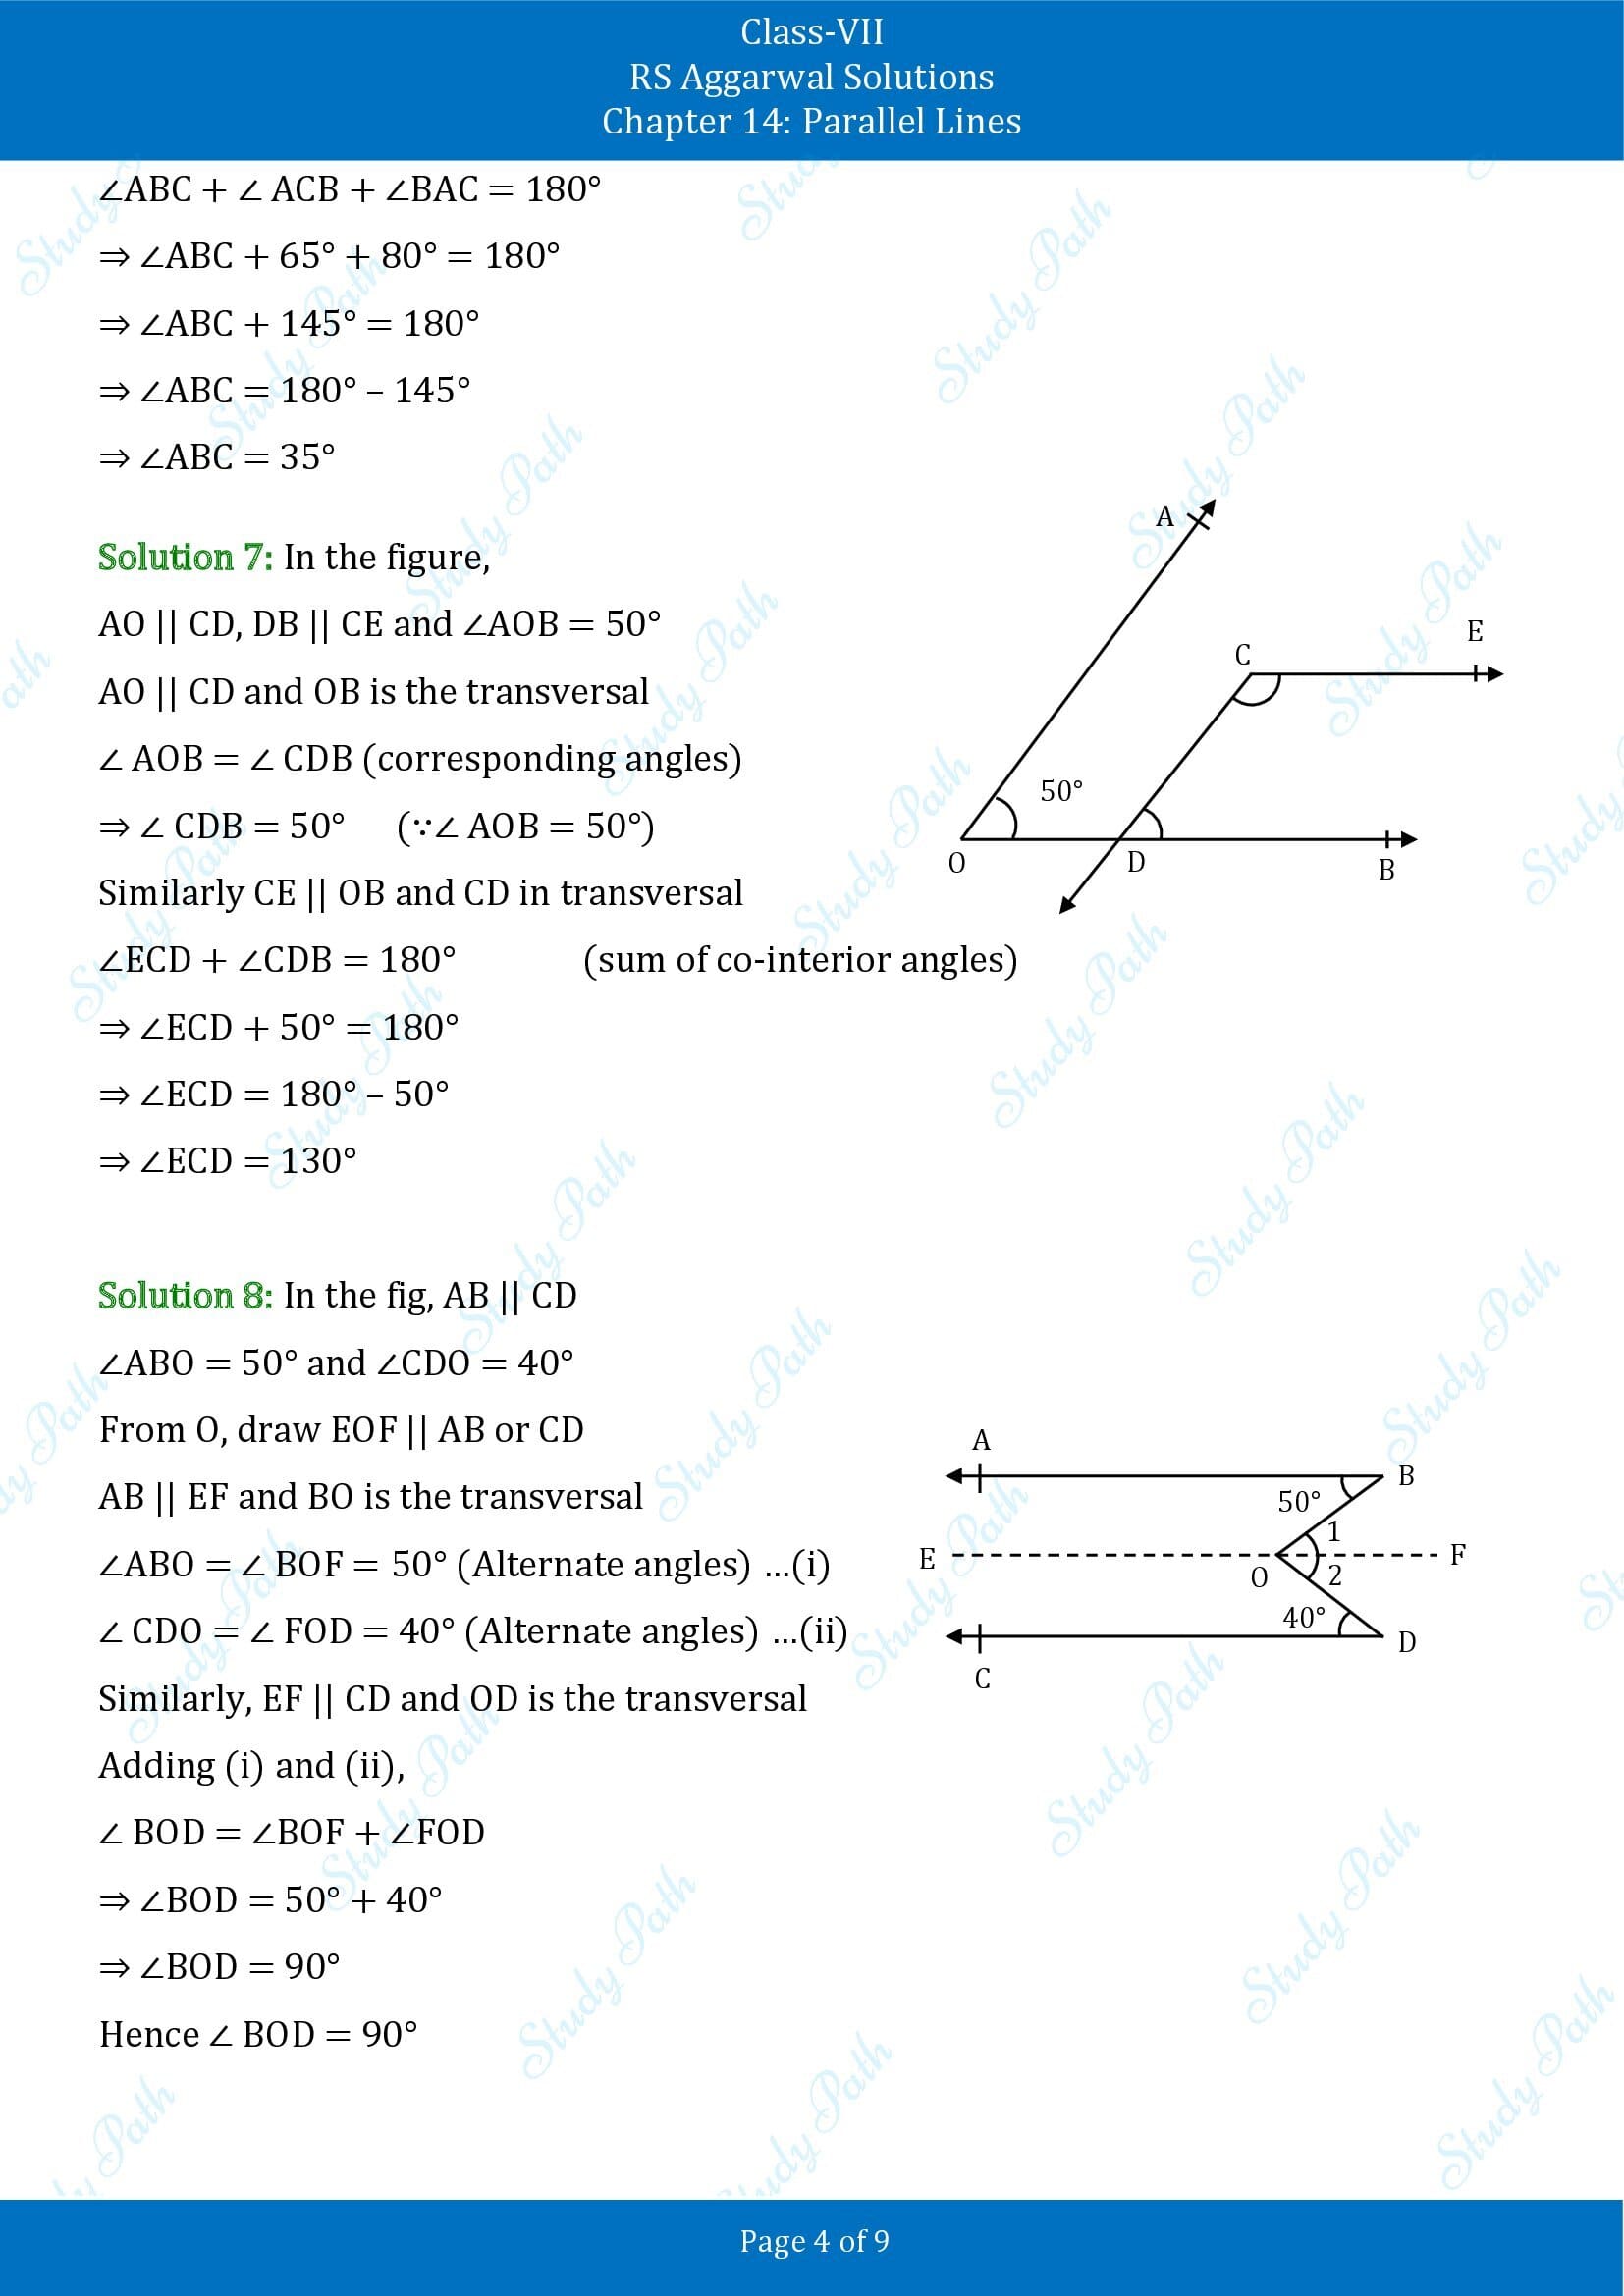 RS Aggarwal Solutions Class 7 Chapter 14 Parallel Lines 00004